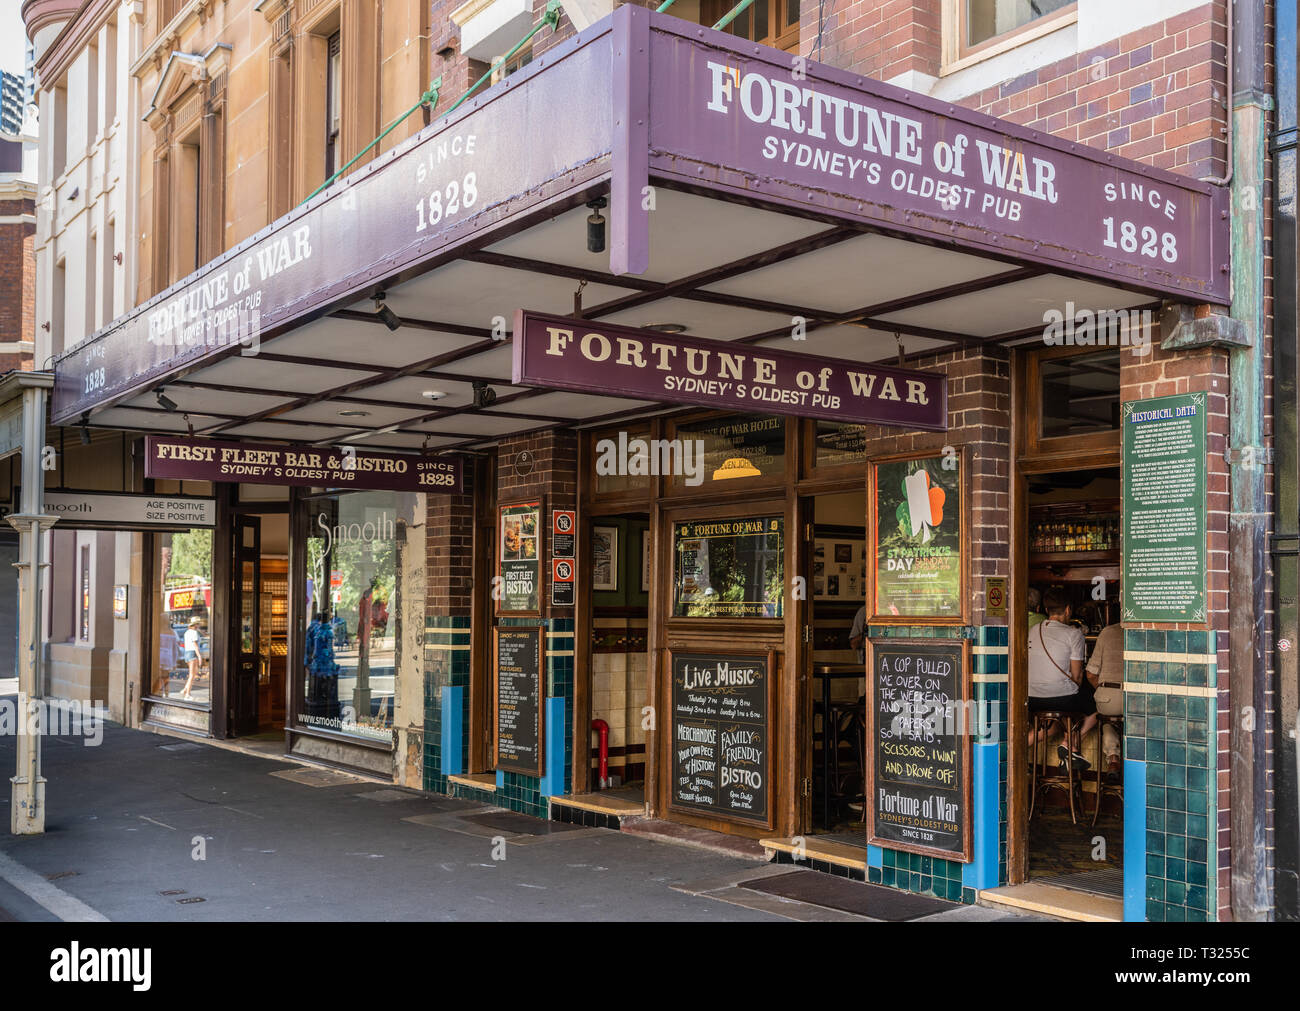 Sydney, Australia - February 11, 2019: Facade with look inside the Fortune of War, oldest pub in town in George Street near Circular Bay. Chalkboards  Stock Photo